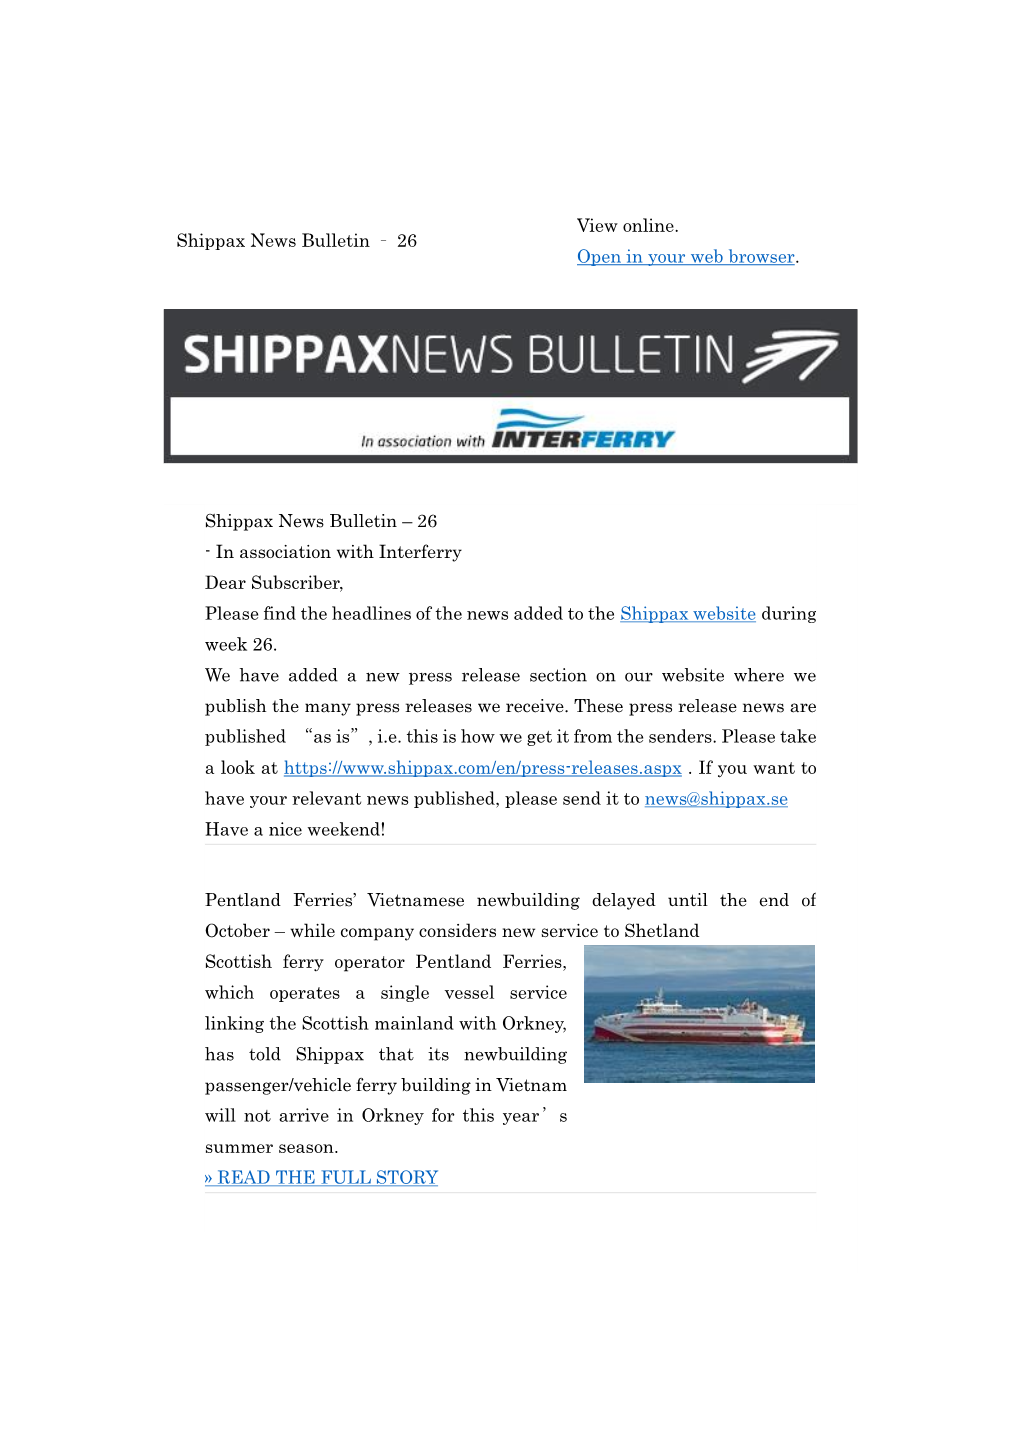 Shippax News Bulletin – 26 View Online. Open in Your Web Browser